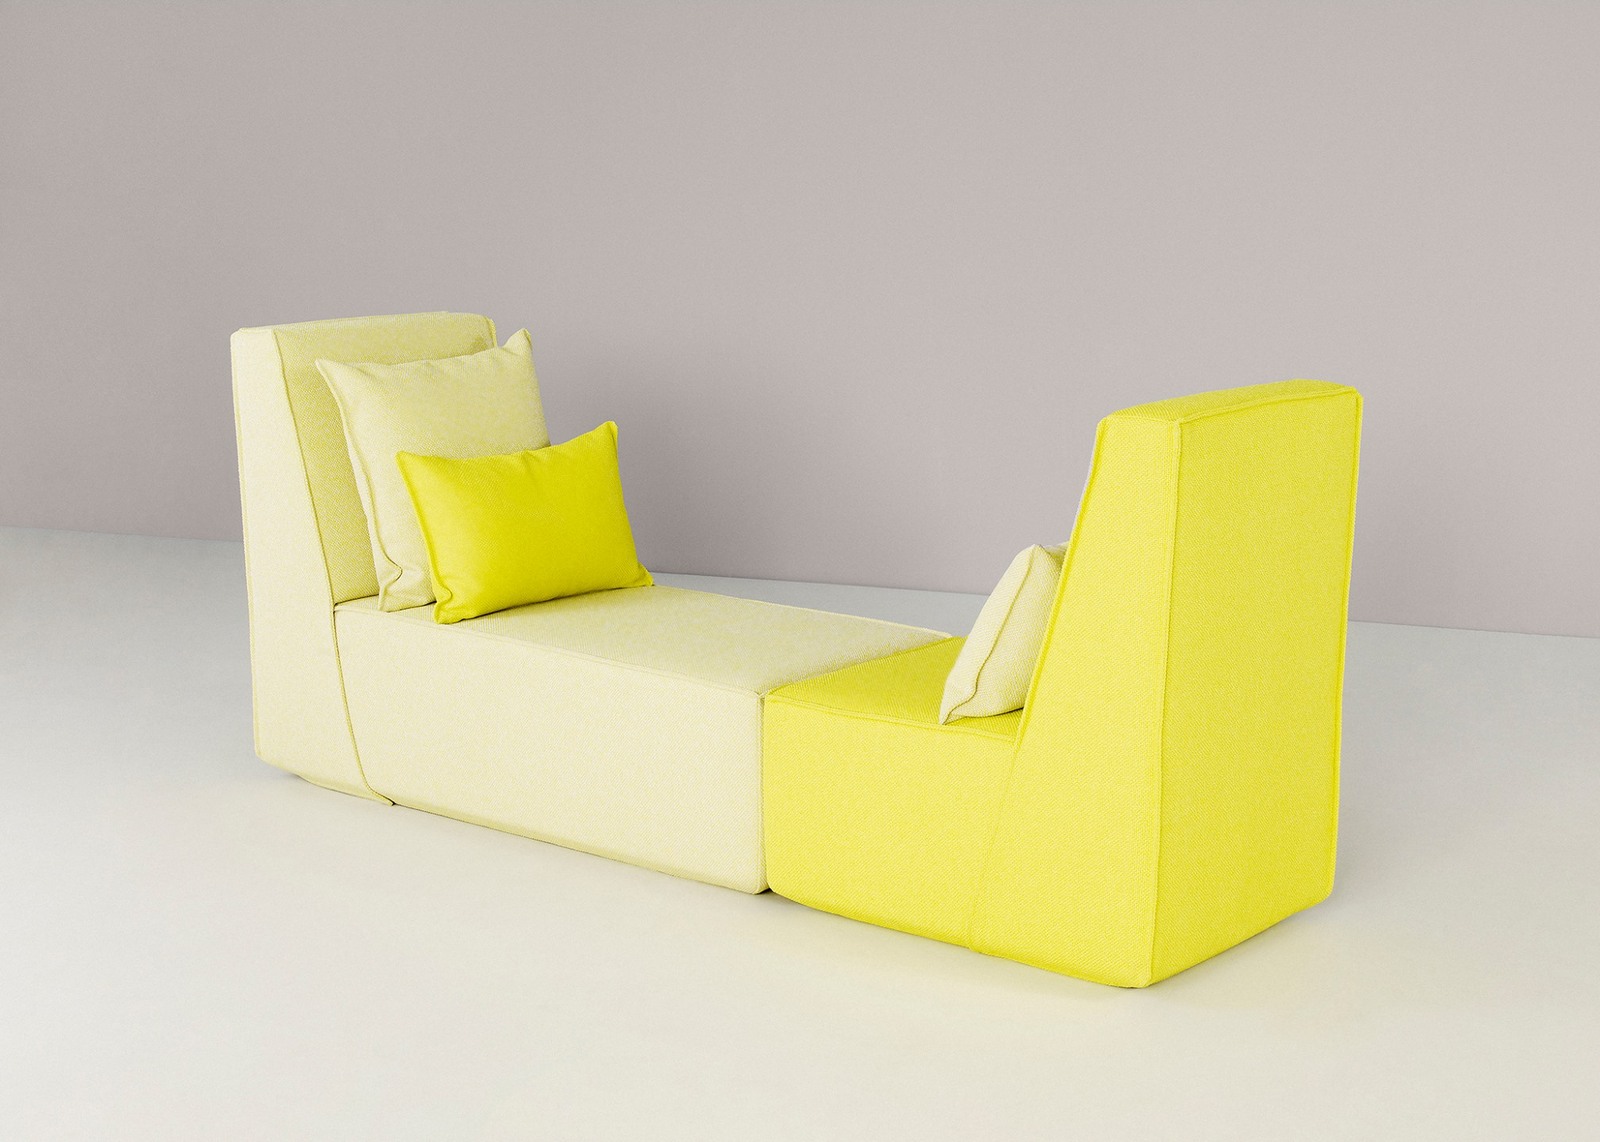 configurable-sofa-sectionals-cubit-by-mymito-8.jpg